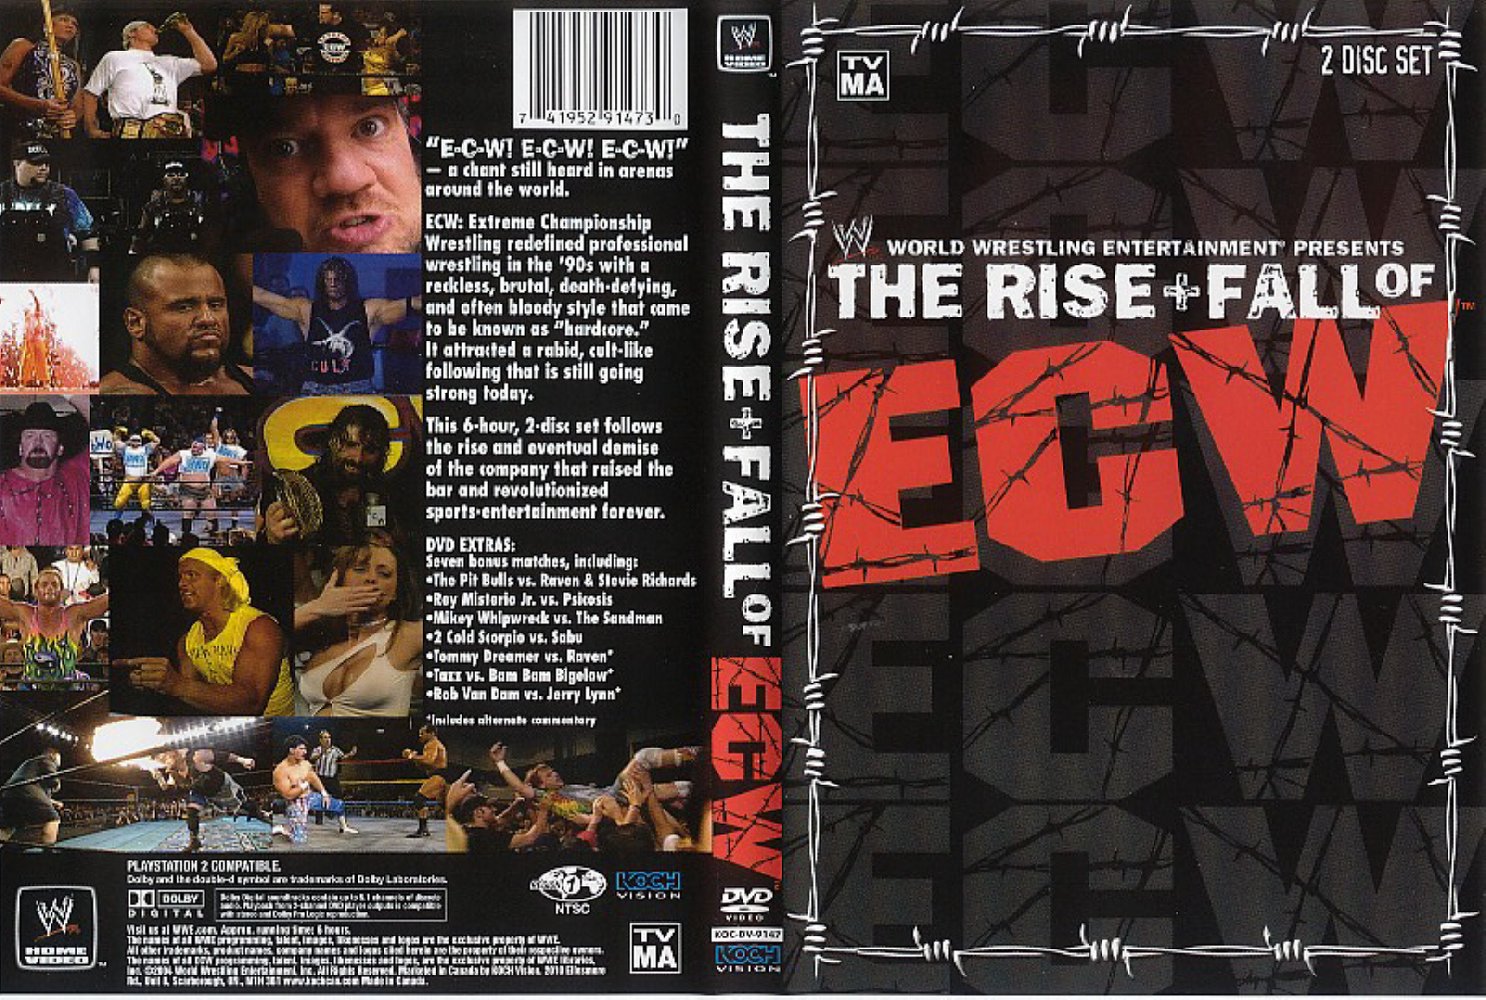 Jaquette DVD The rise and fall of ECW